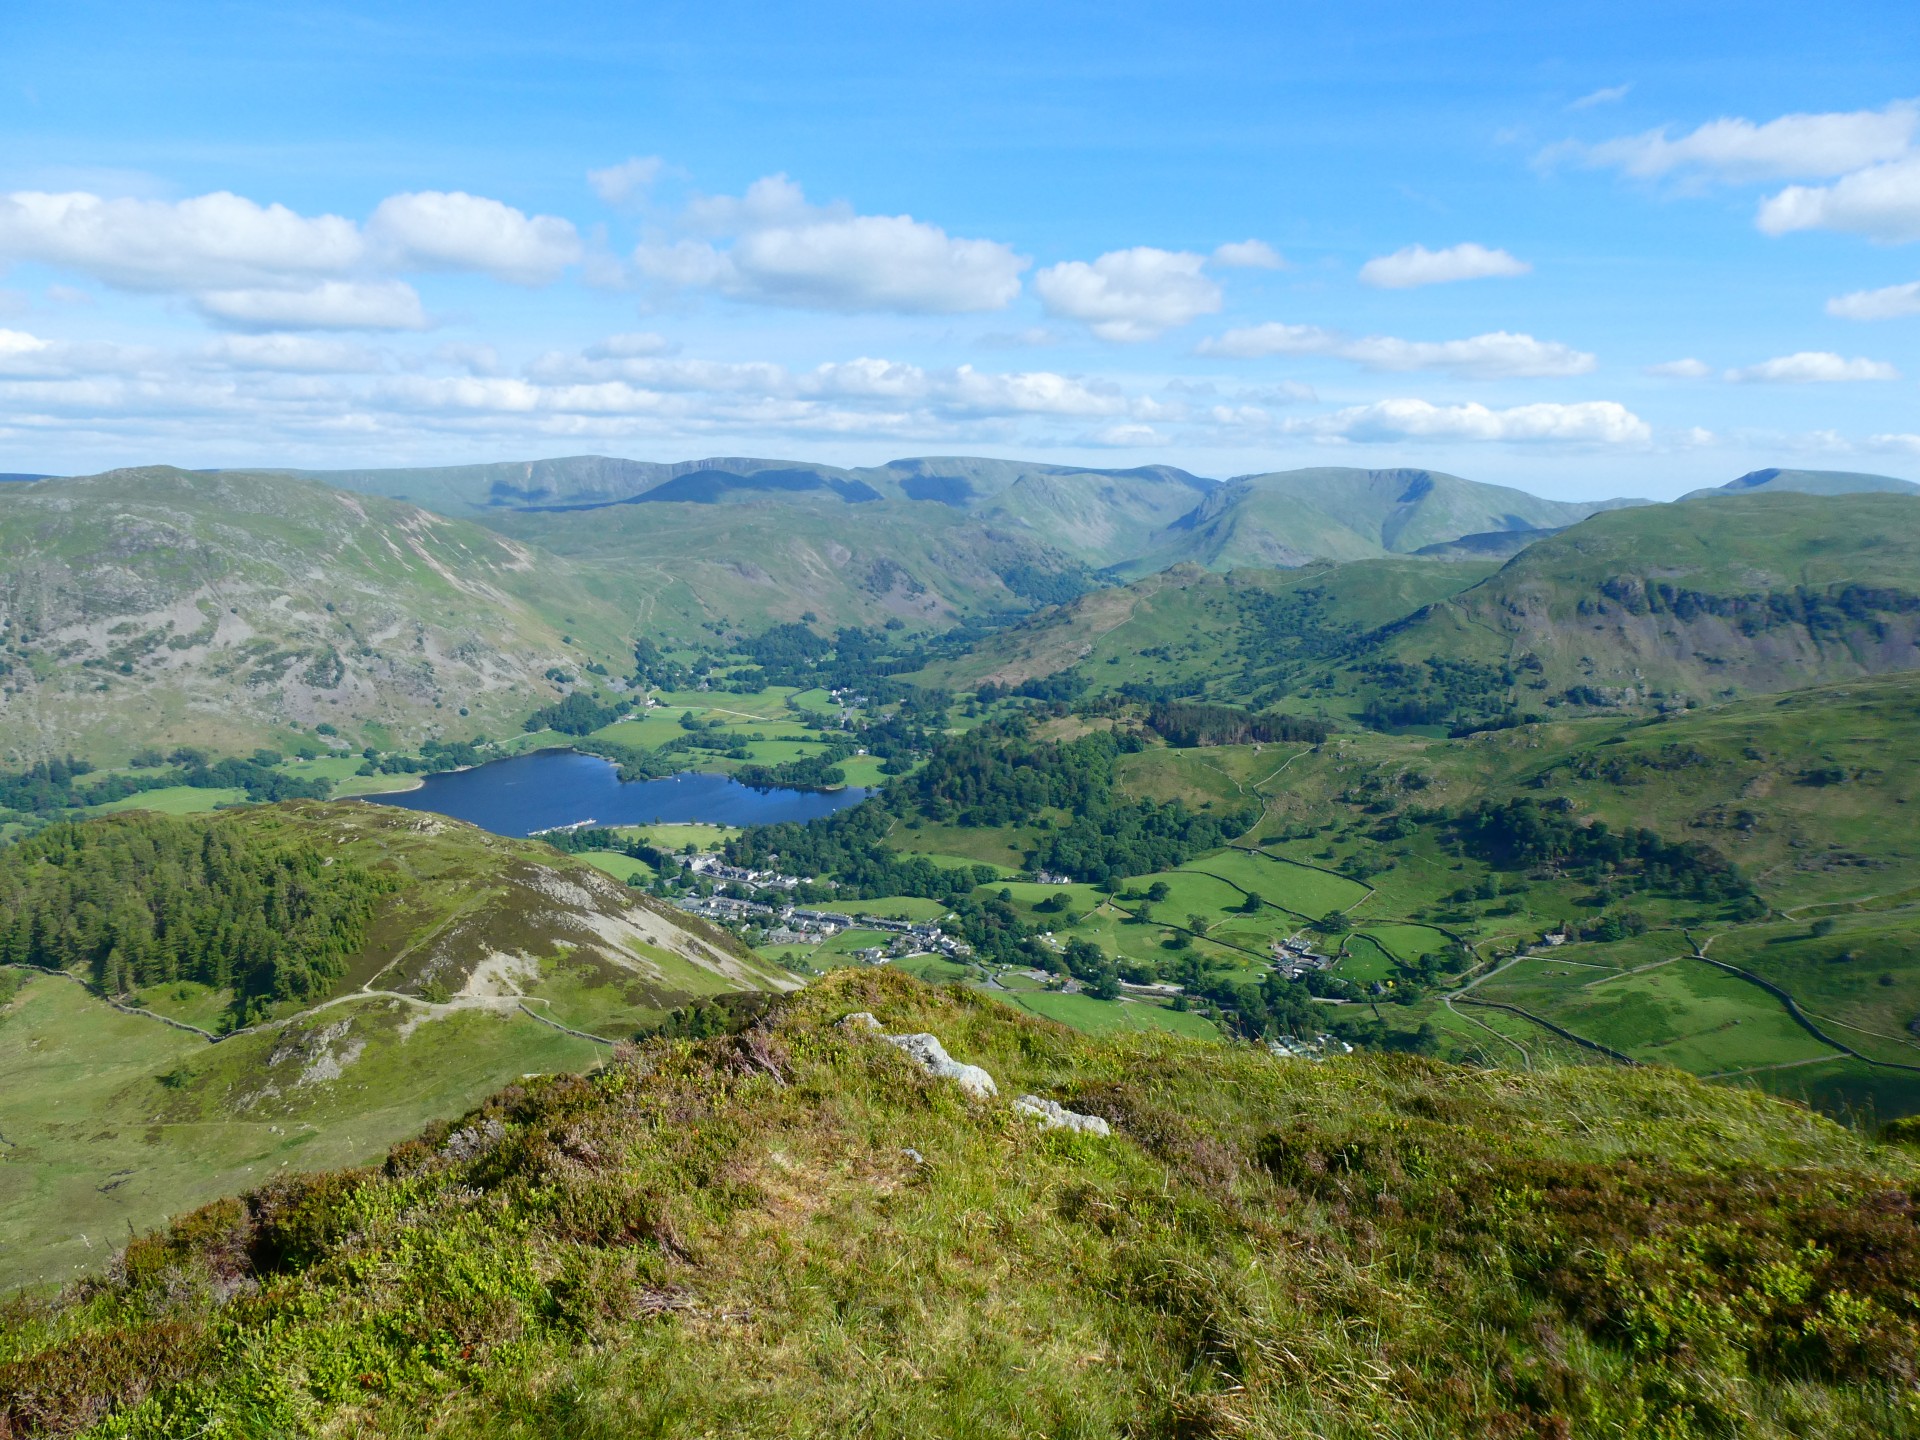 Now we just need to get down from Glenridding Dodd